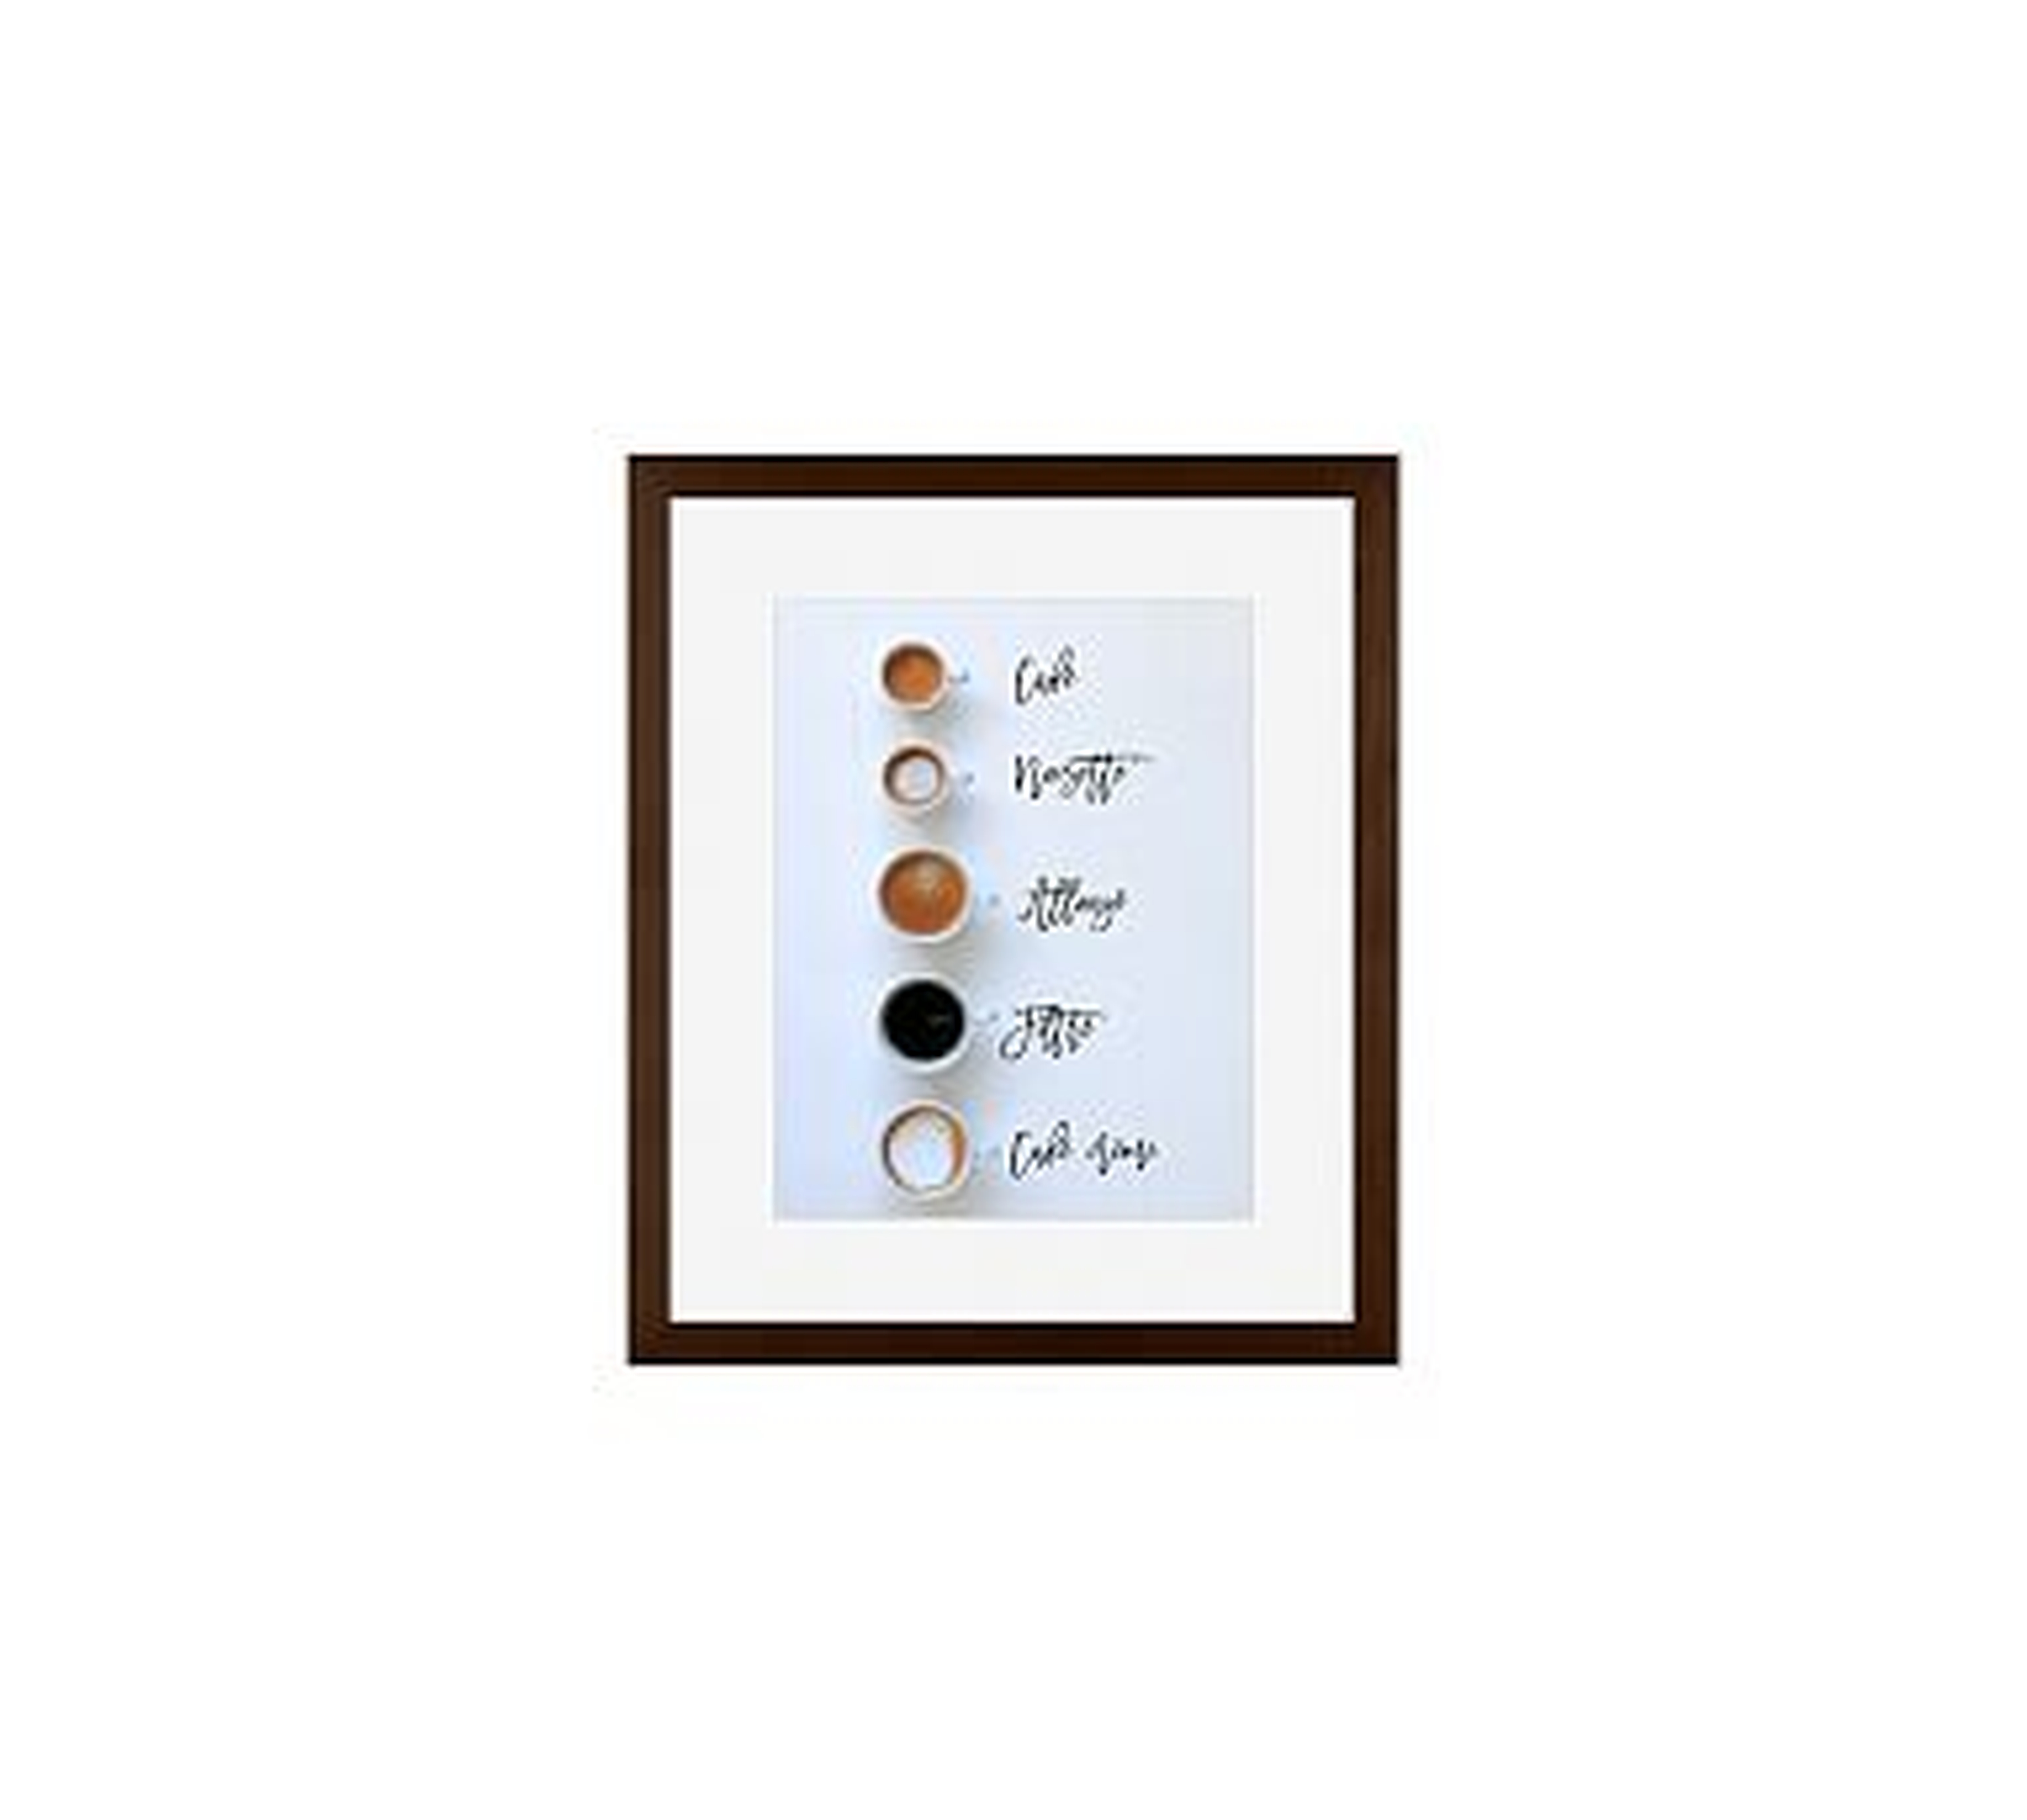 5 Ways To Order Coffee In Paris Framed Print by Rebecca Plotnick, 11x13", Wood Gallery Frame, Espresso, Mat - Pottery Barn